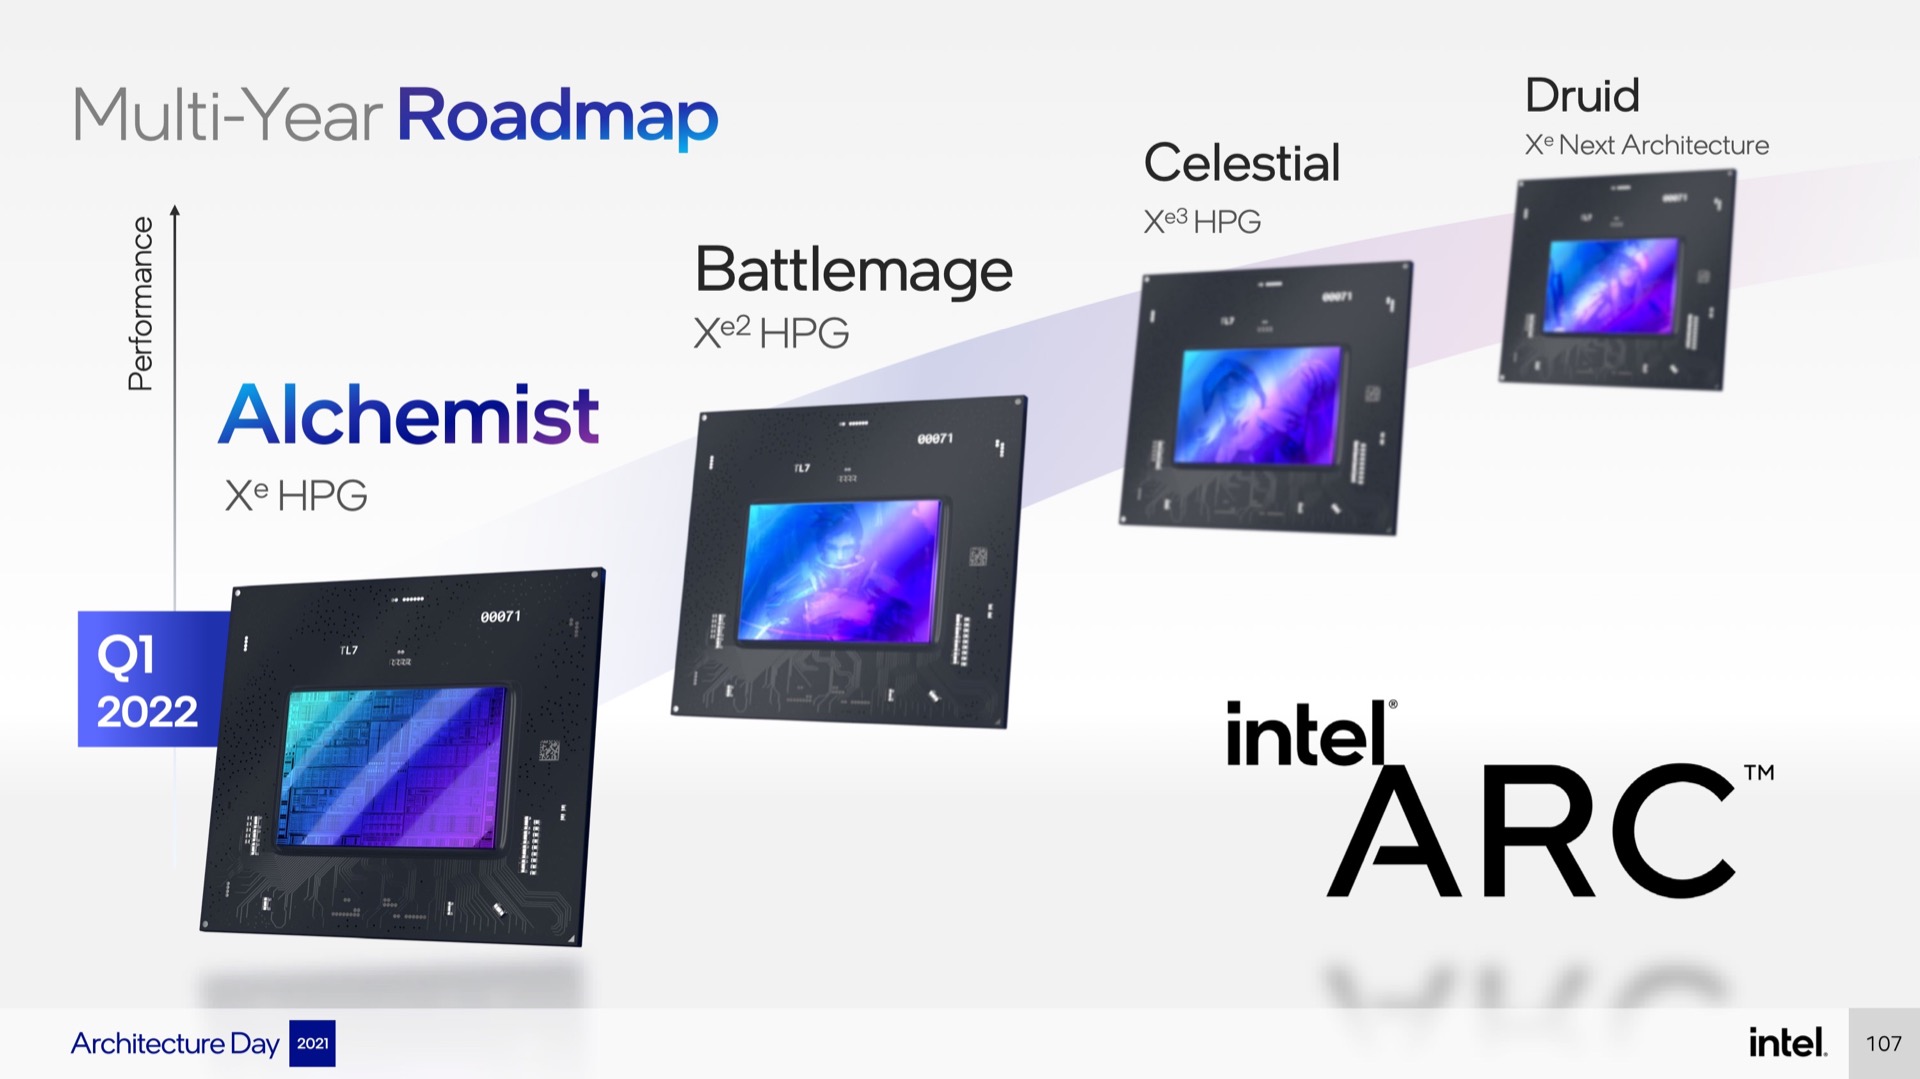 Intel talked about its upcoming GPU codenames earlier this week when it announced the Arc branding. Alchemist is Xe-HPG, Battlemage will be Xe2-HPG, and Celestial will be Xe3-HPG. Druid's architecture doesn't have a name yet—we might suggest Xe4-HPG.